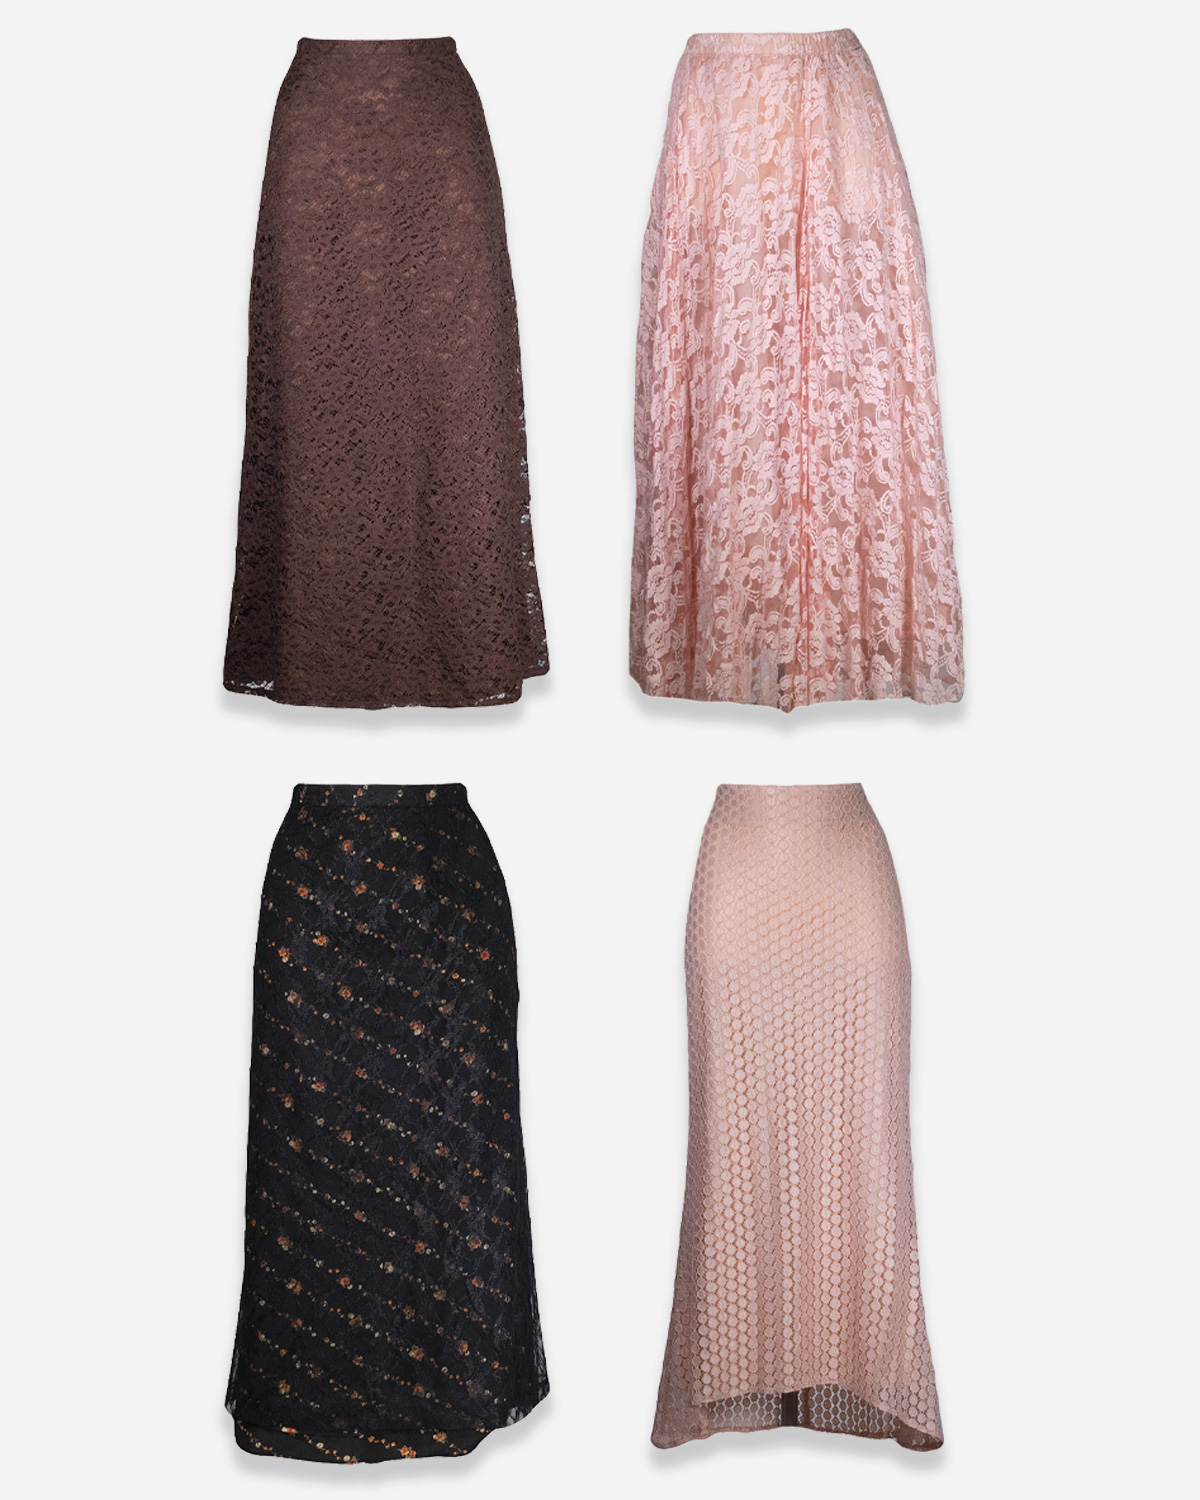 Box four long lace skirts